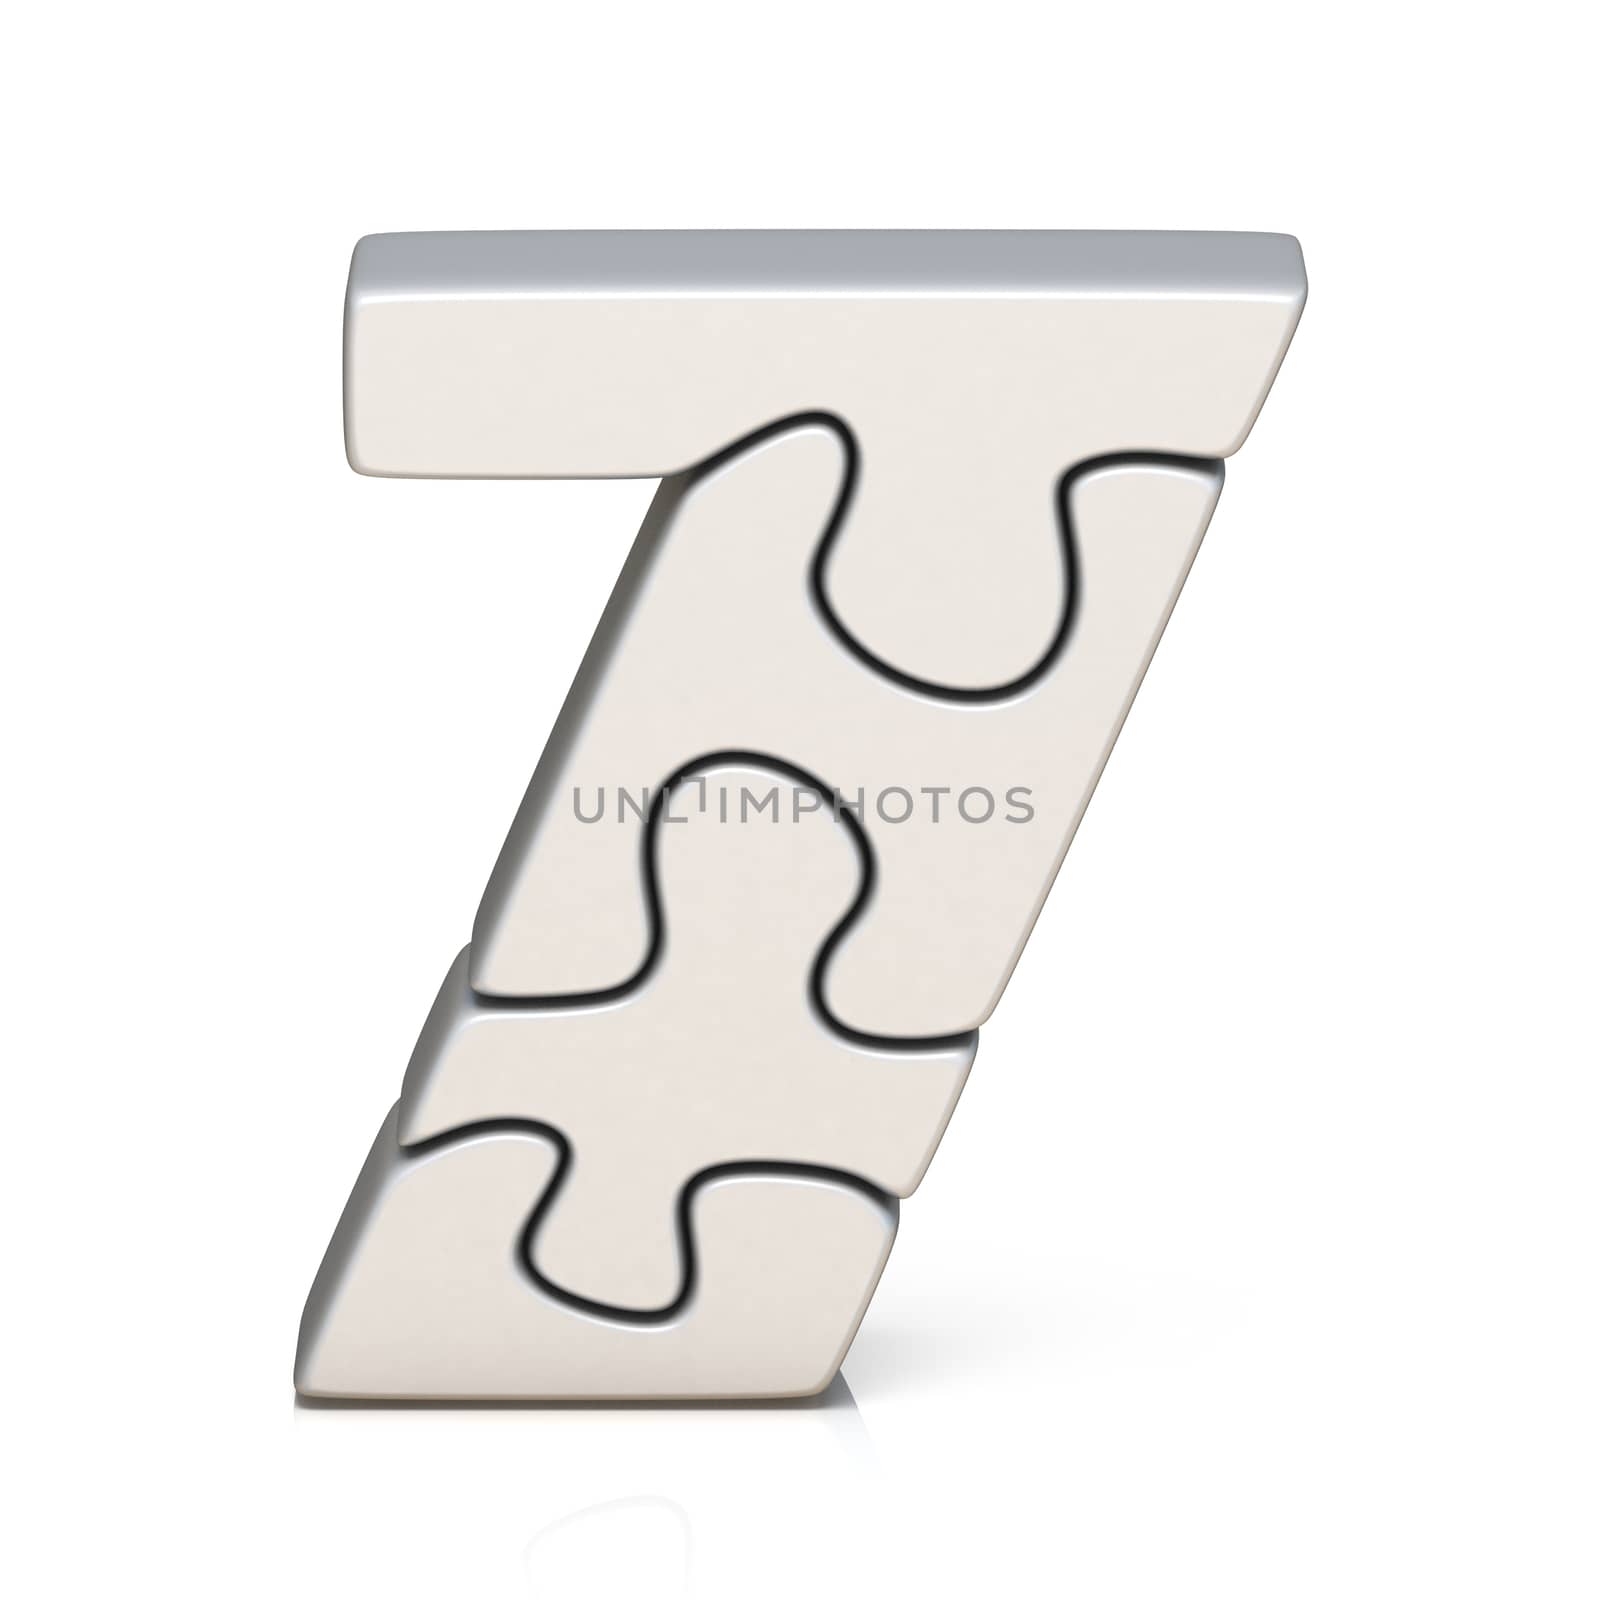 White puzzle jigsaw number SEVEN 7 3D render illustration isolated on white background